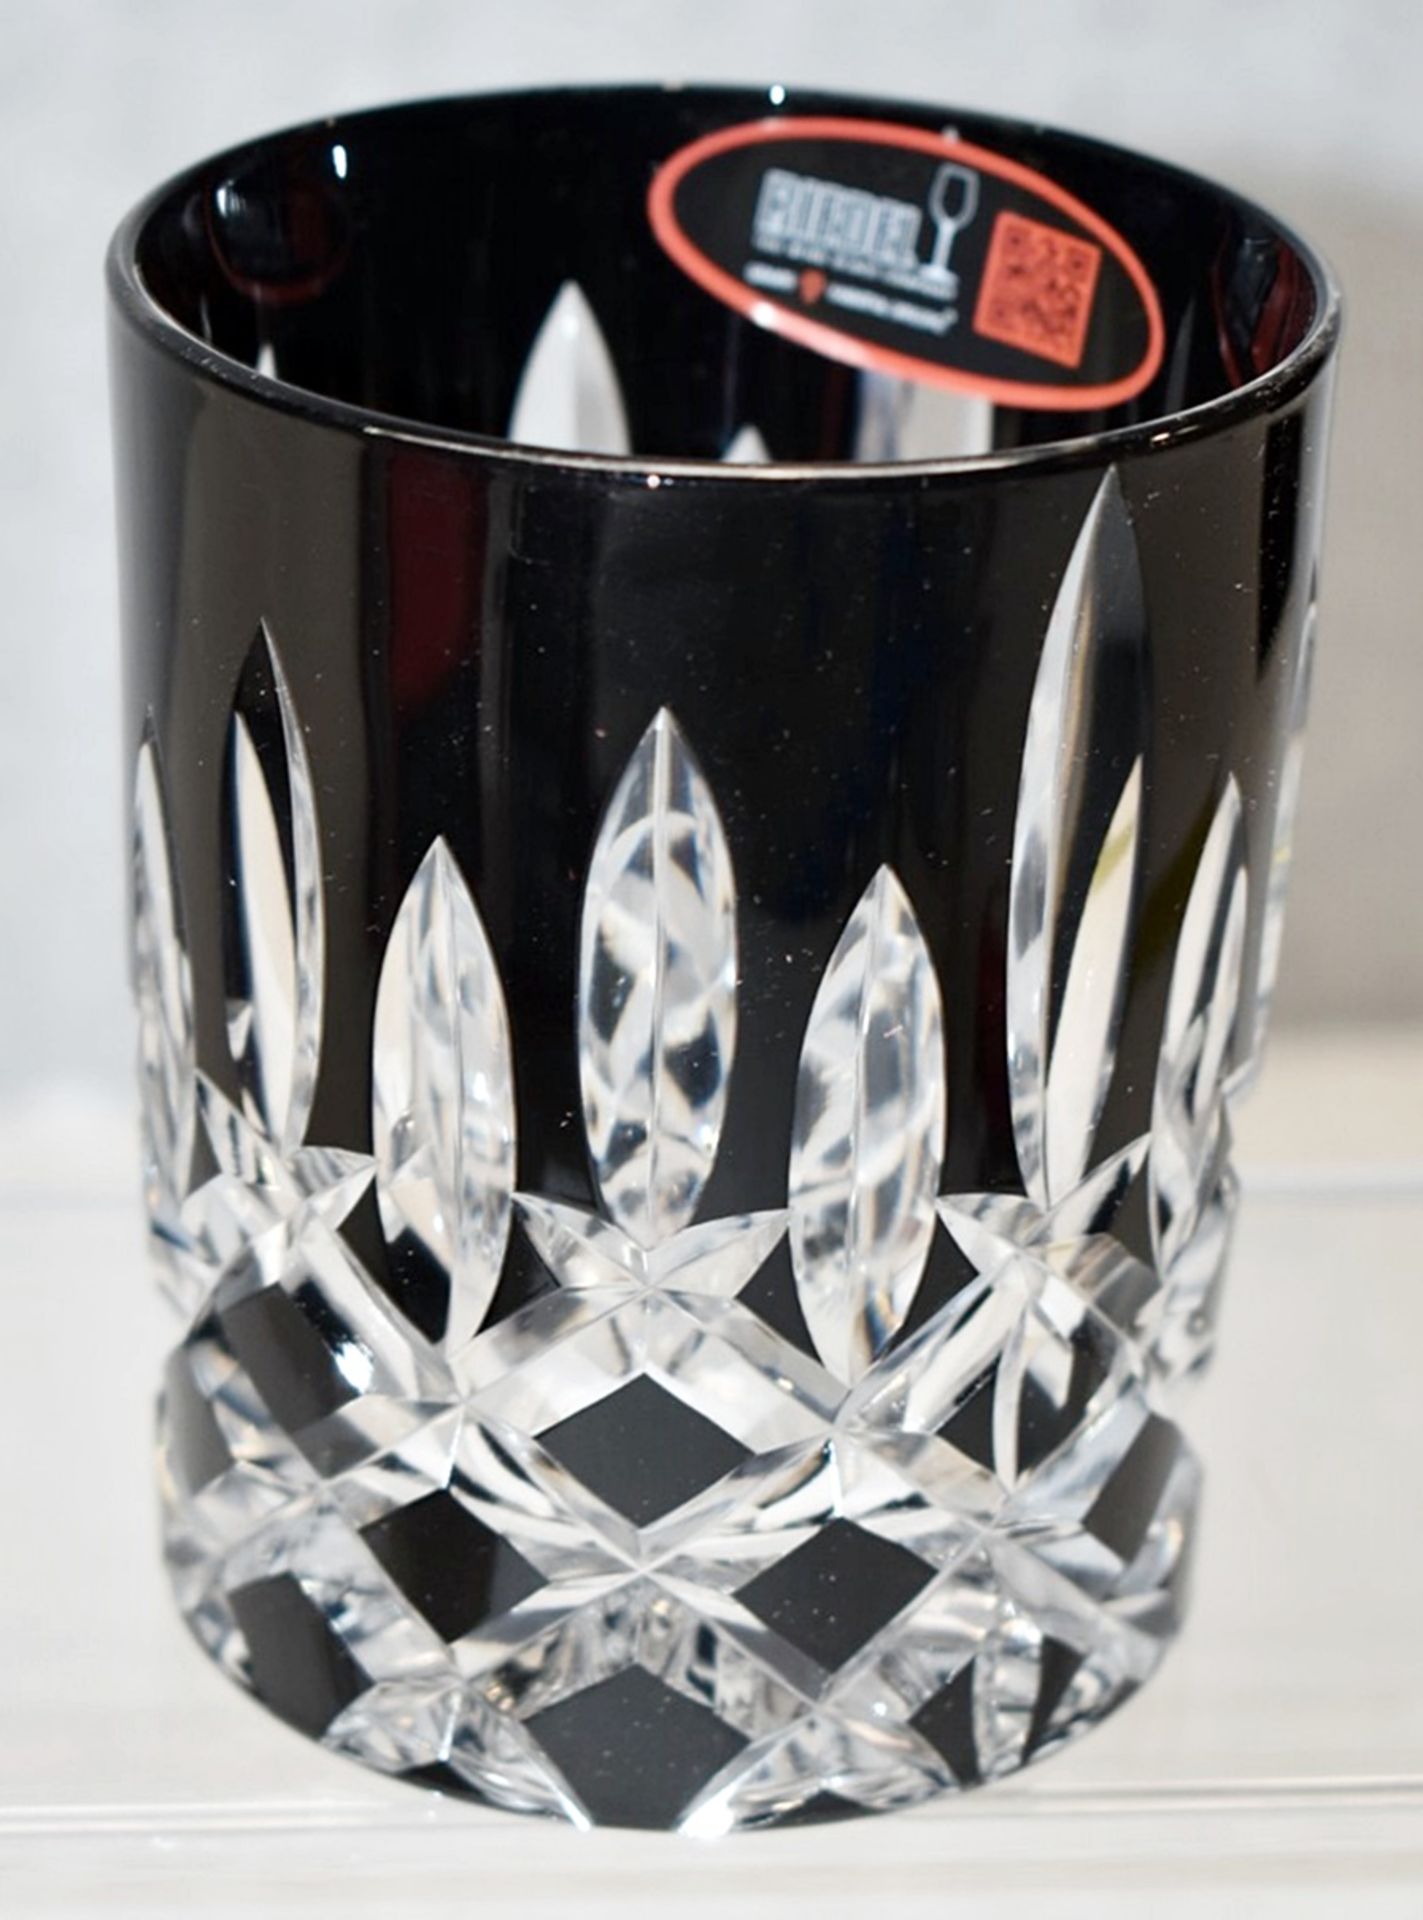 3 x RIEDEL 'Laudon' Luxury Crystal Whisky Glasses In Black (295ml) - Total RRP £225.00 - Image 3 of 10